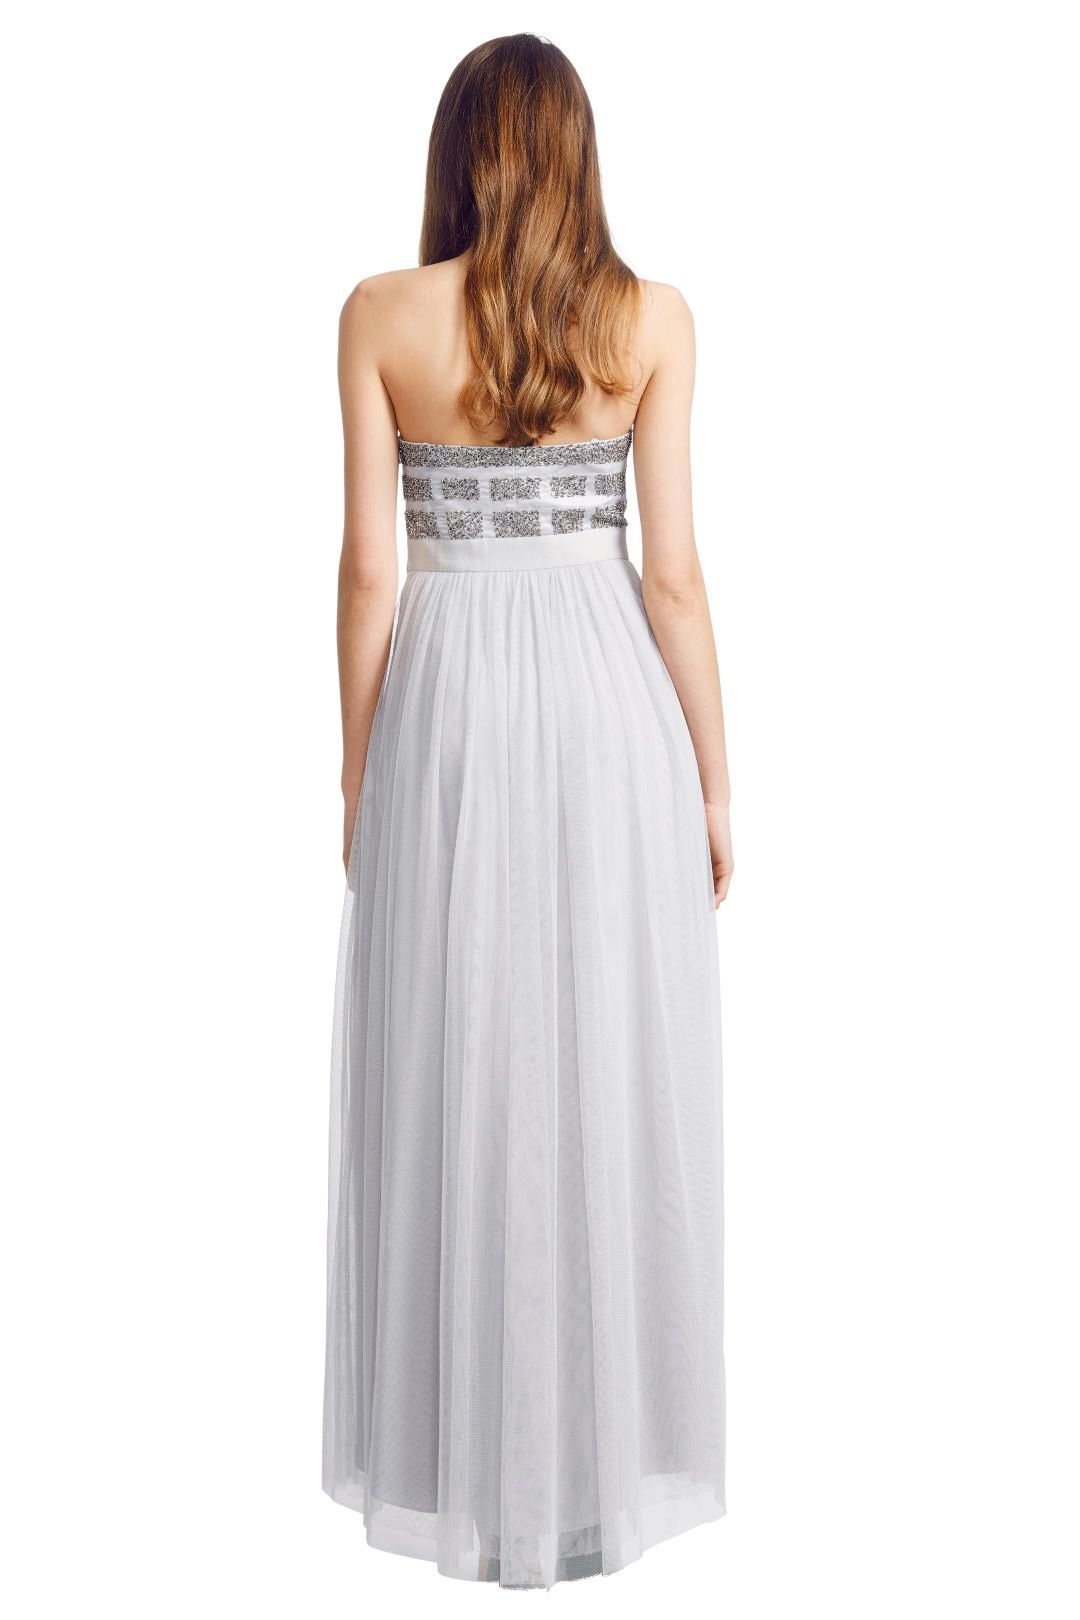 George - Pixel Gown - Silver - Back